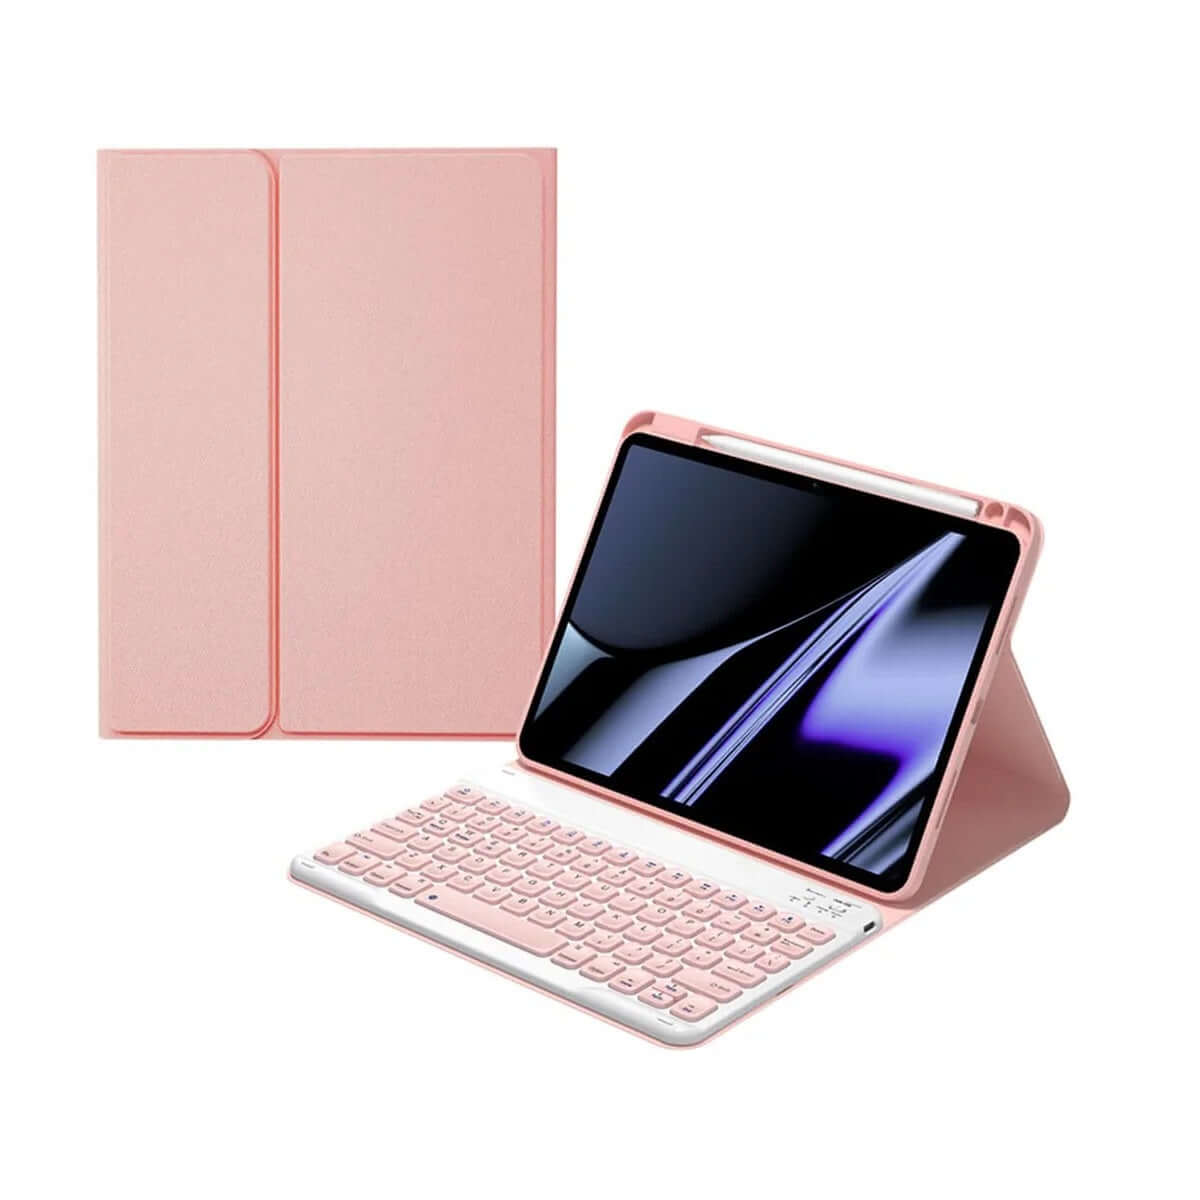 iPad case with removable bluetooth keyboard for ipad 9th/8th/7th, iPad Air 3/Pro 10.5